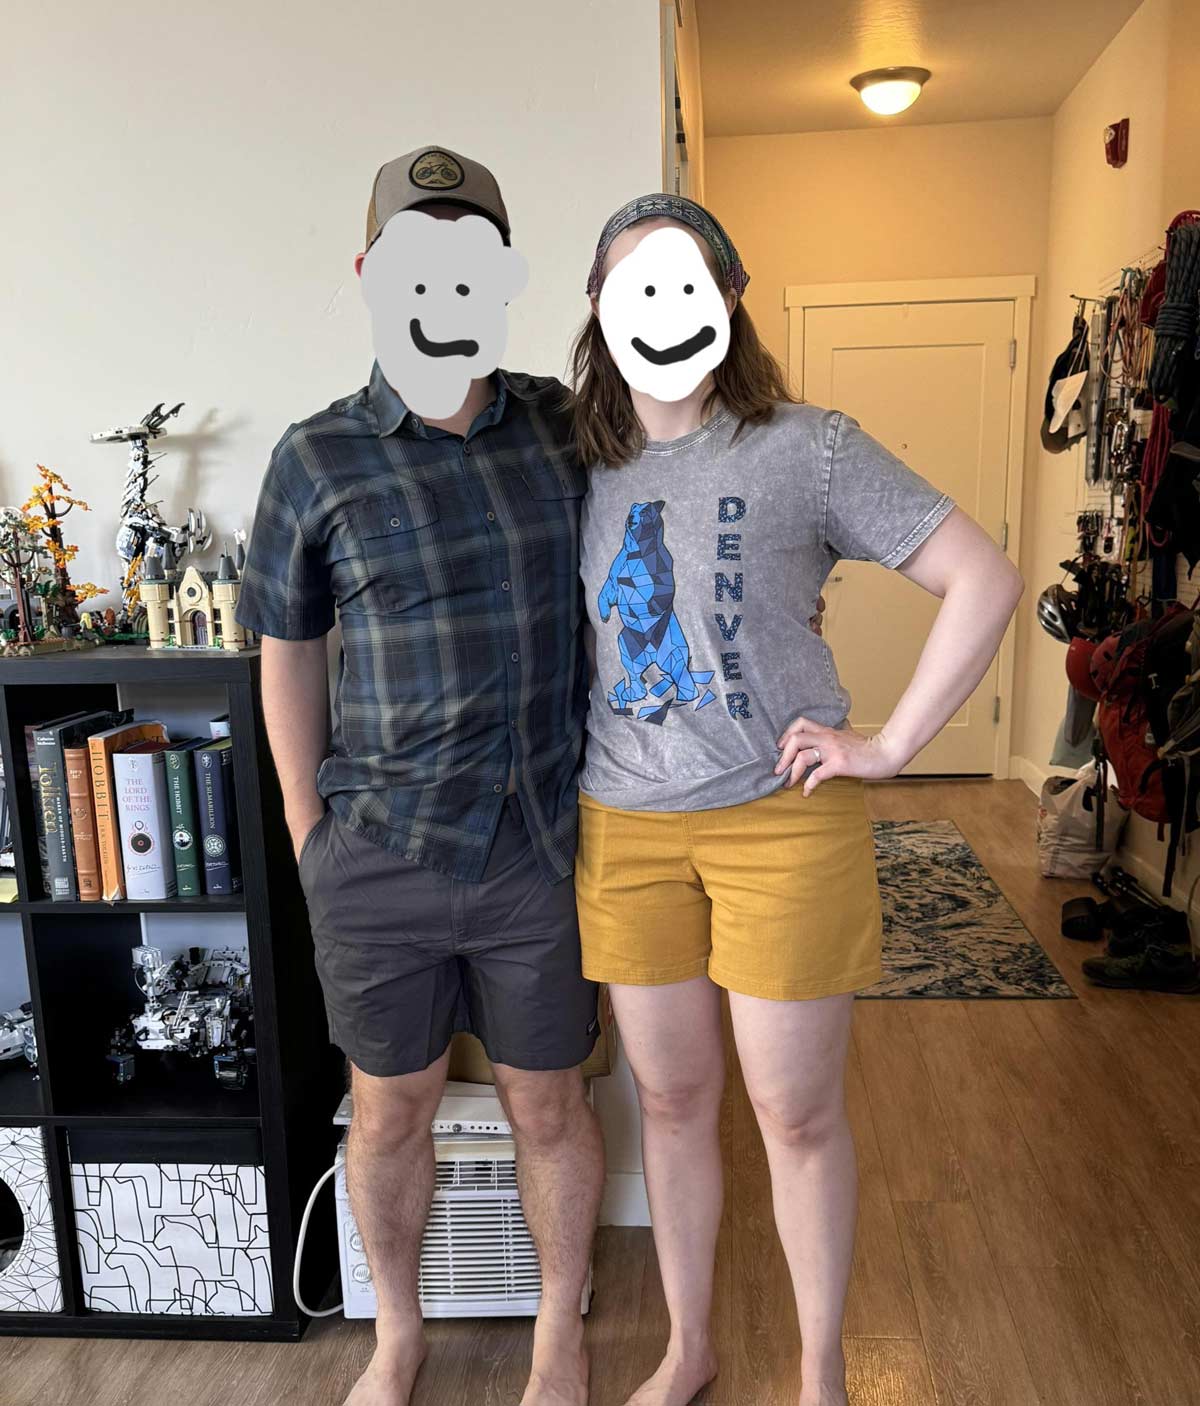 Me (69", 175cm) with short legs and a long torso, standing next to my wife (67", 170cm) who has long legs and a short torso, both wearing shorts with a 6" (15cm) inseam